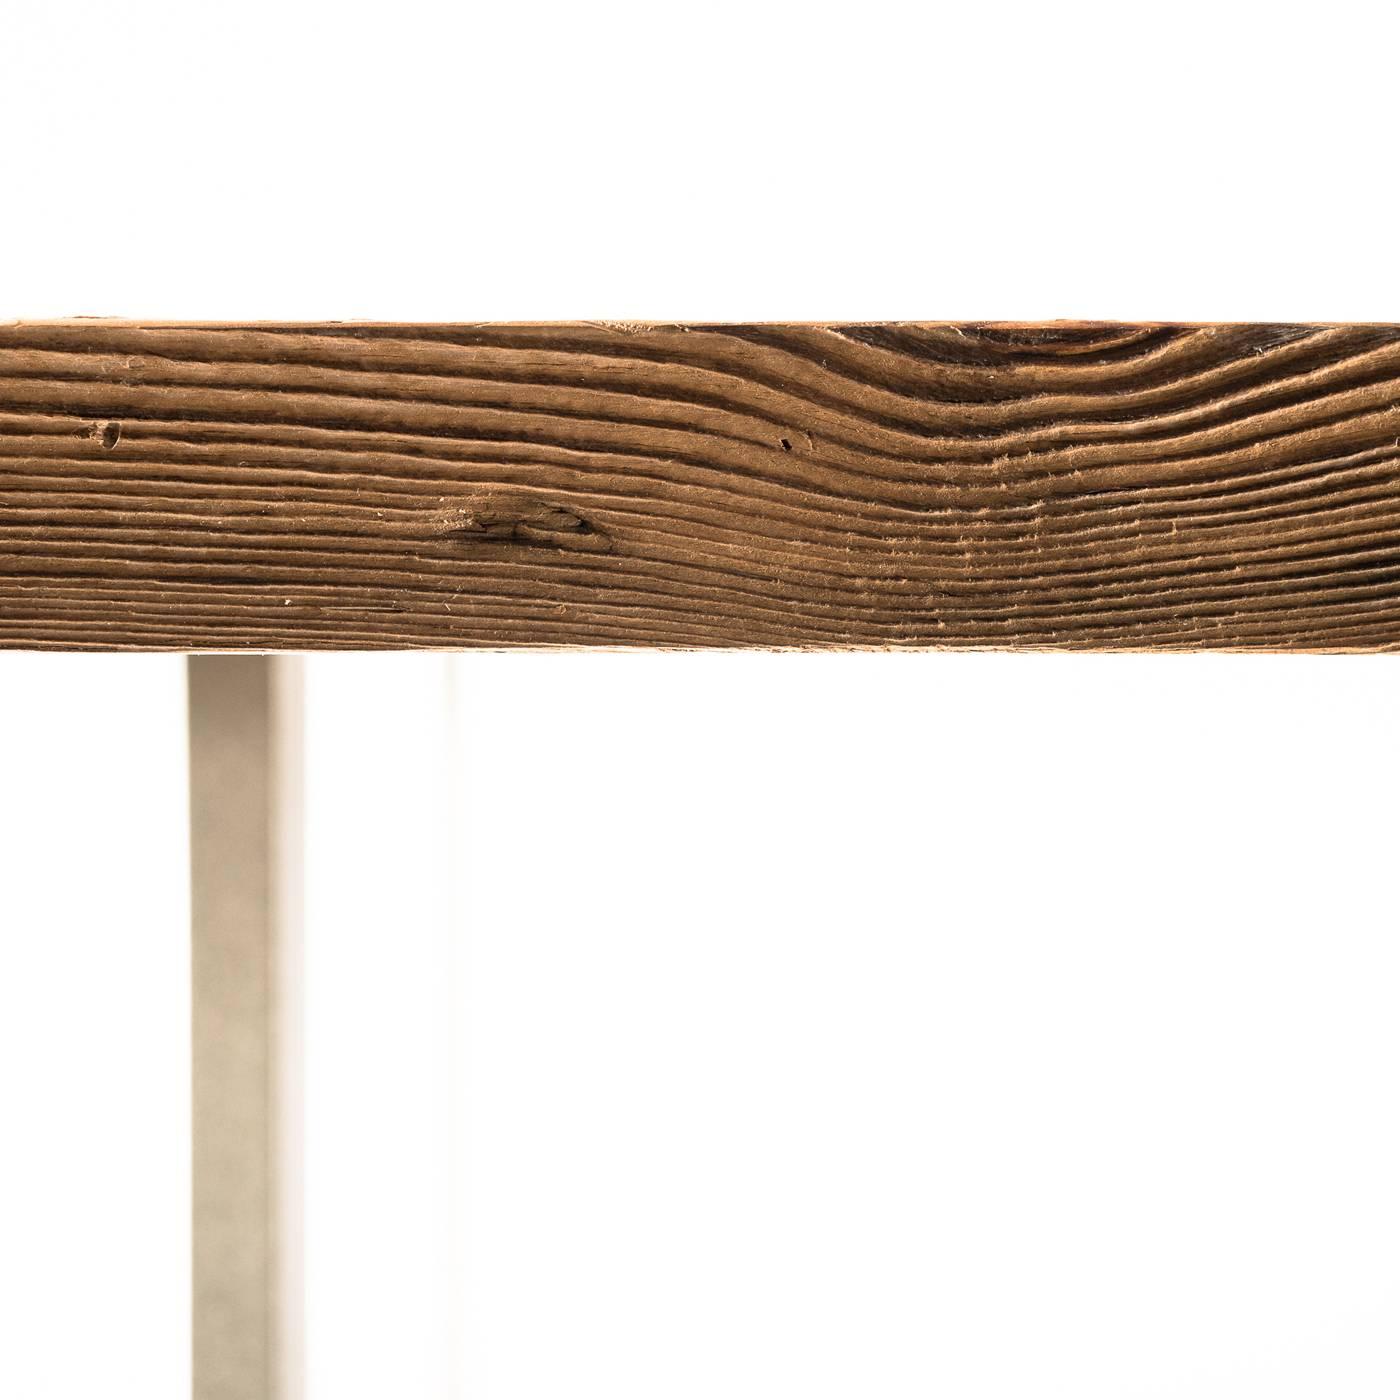 This stunning table is made of inlays of salvaged wood carefully selected and individually crafted by expert carpenters to create a unique piece where tradition and innovation blend. The rectangular top is supported by two austere handmade iron legs